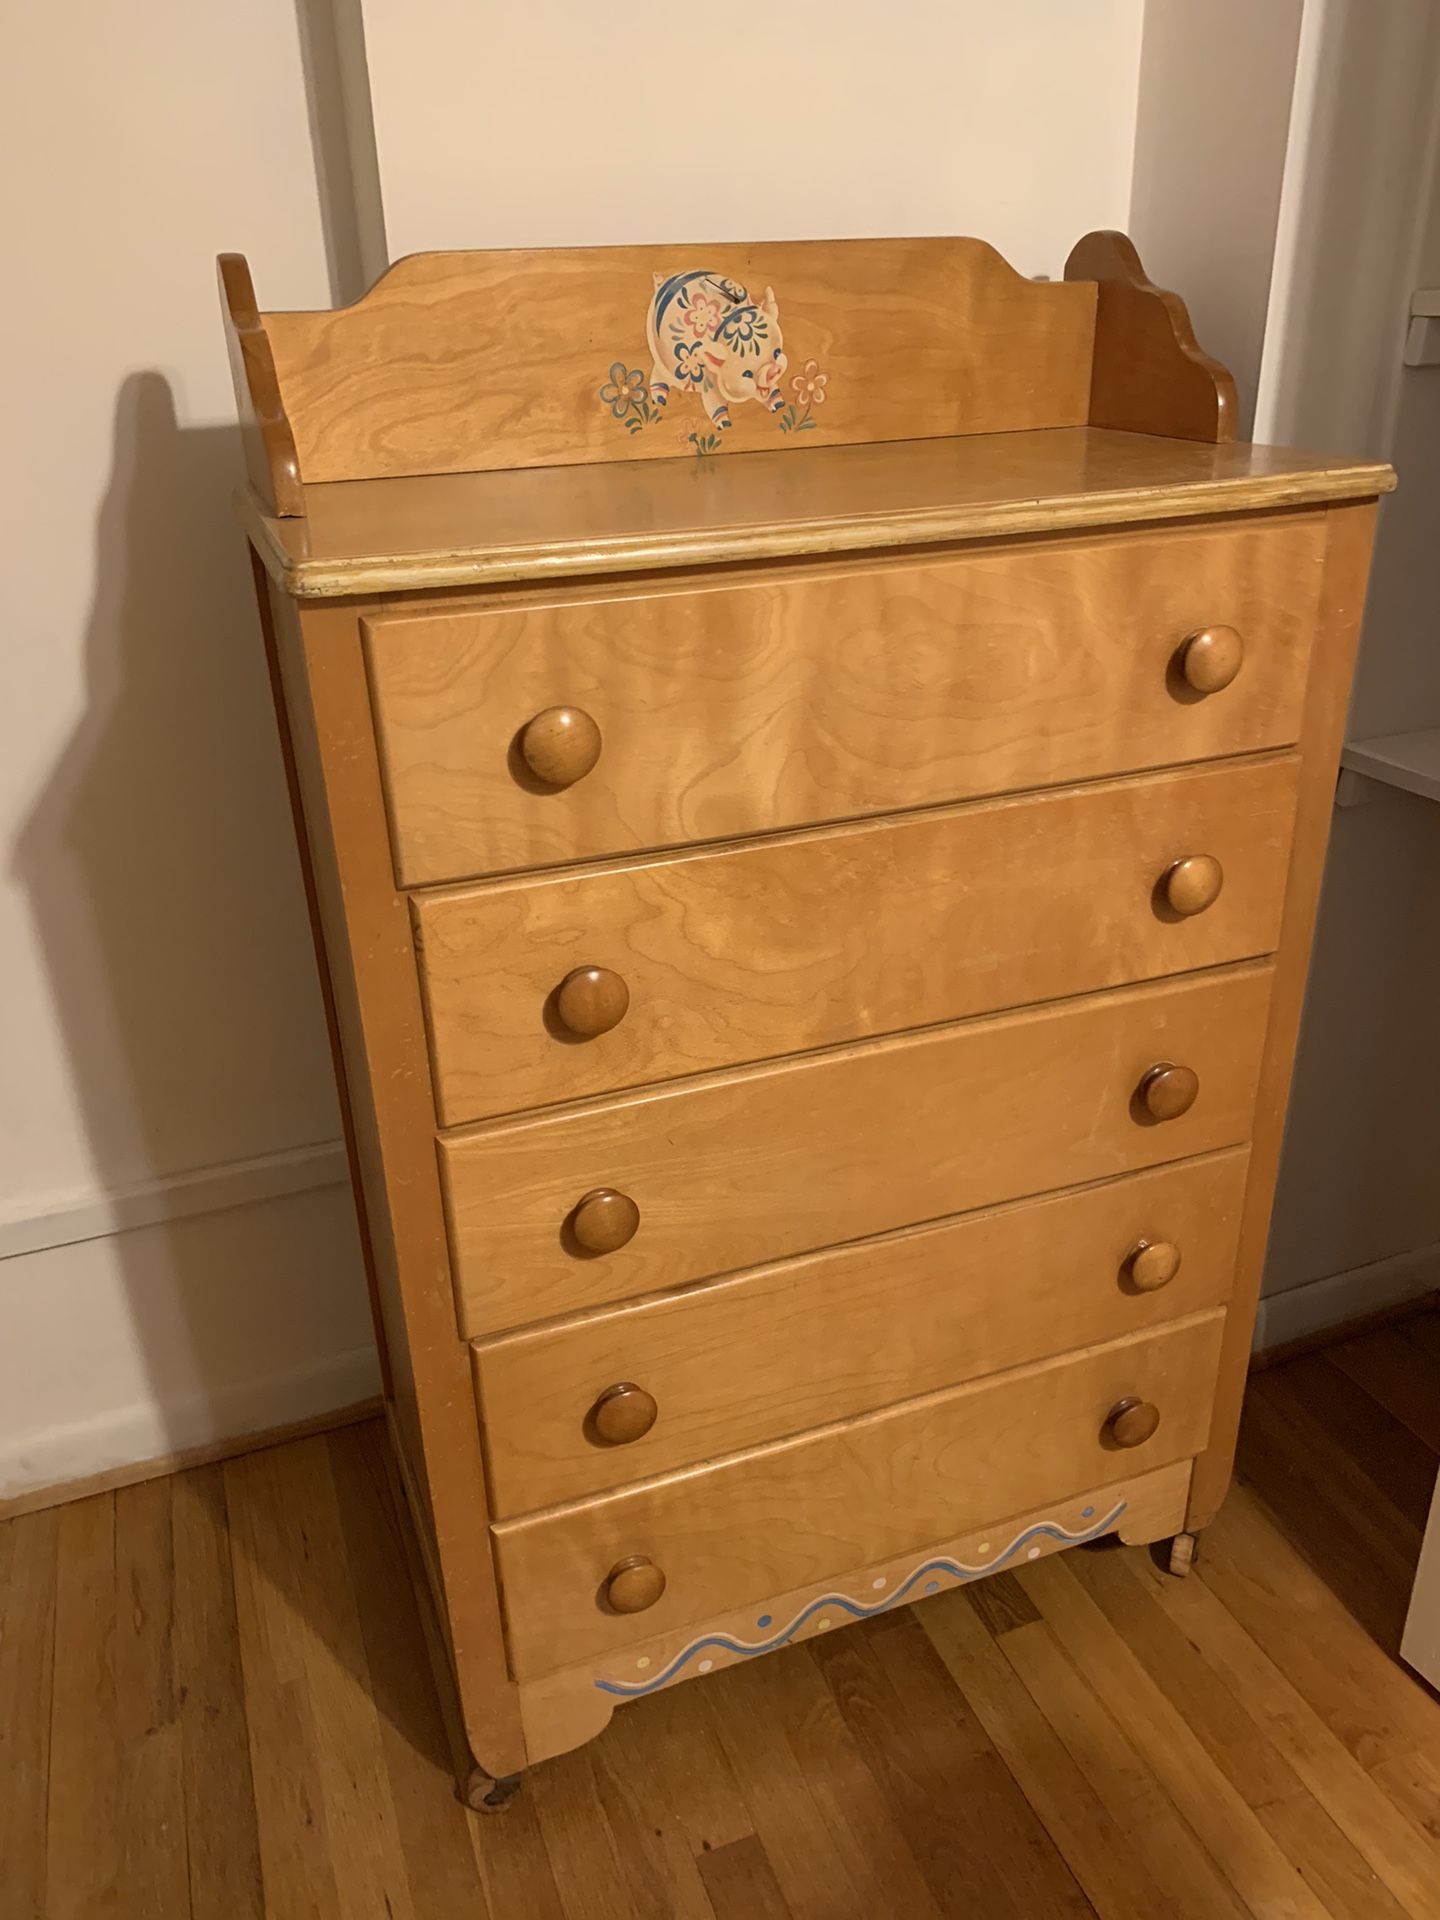 Lullaby furniture company babies dresser